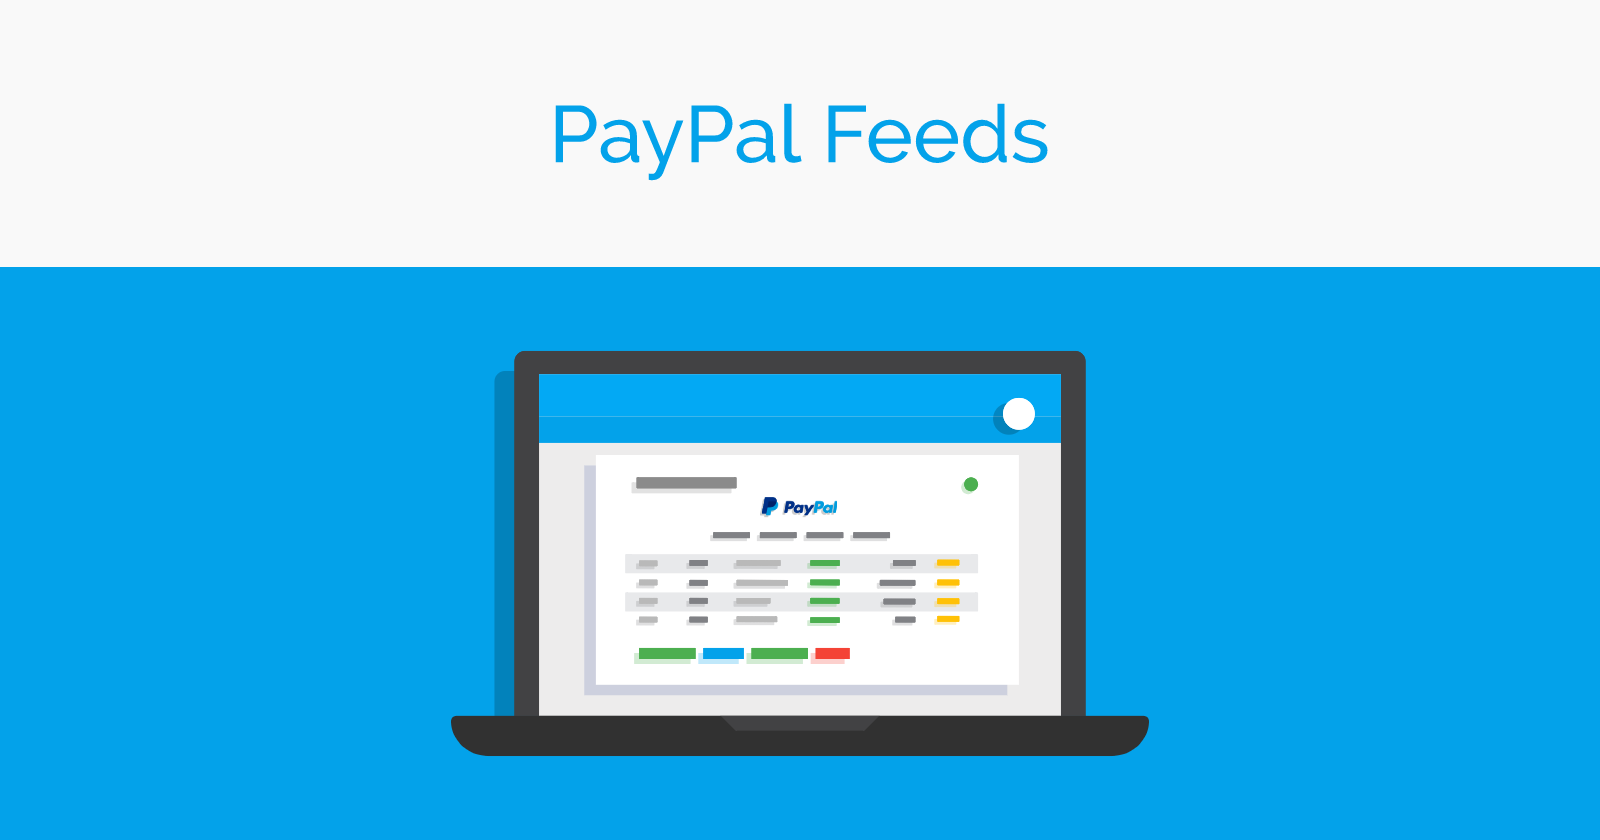 PayPal Feeds